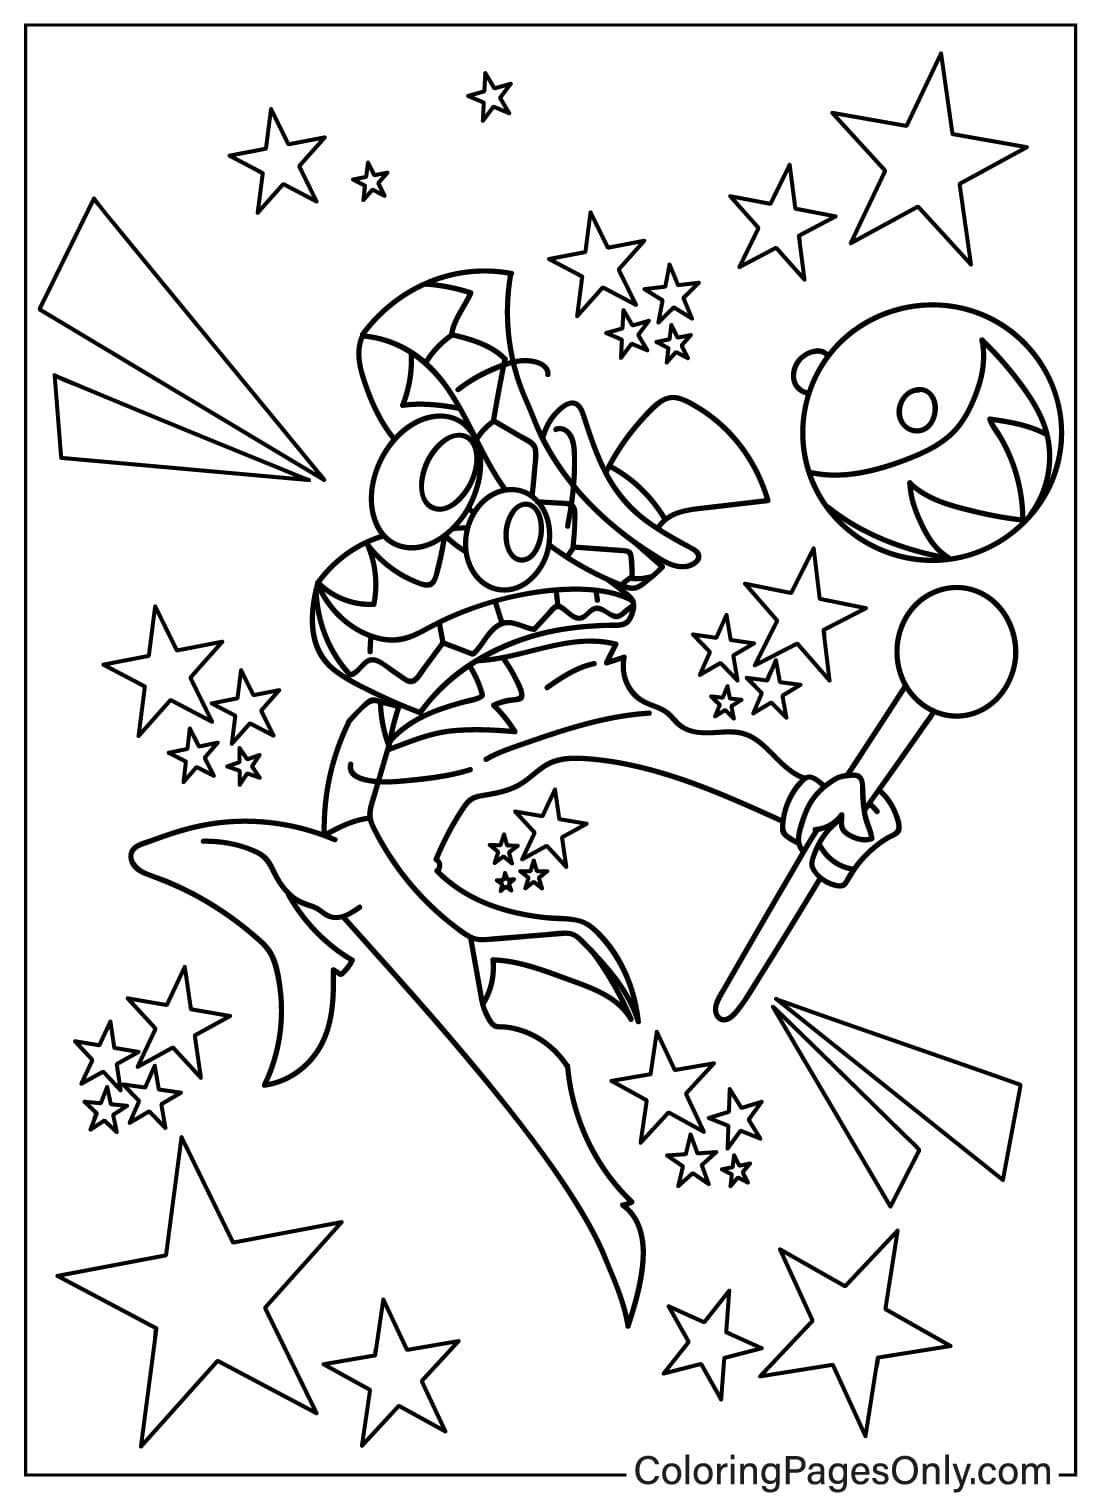 Printable Caine Coloring Page from Caine